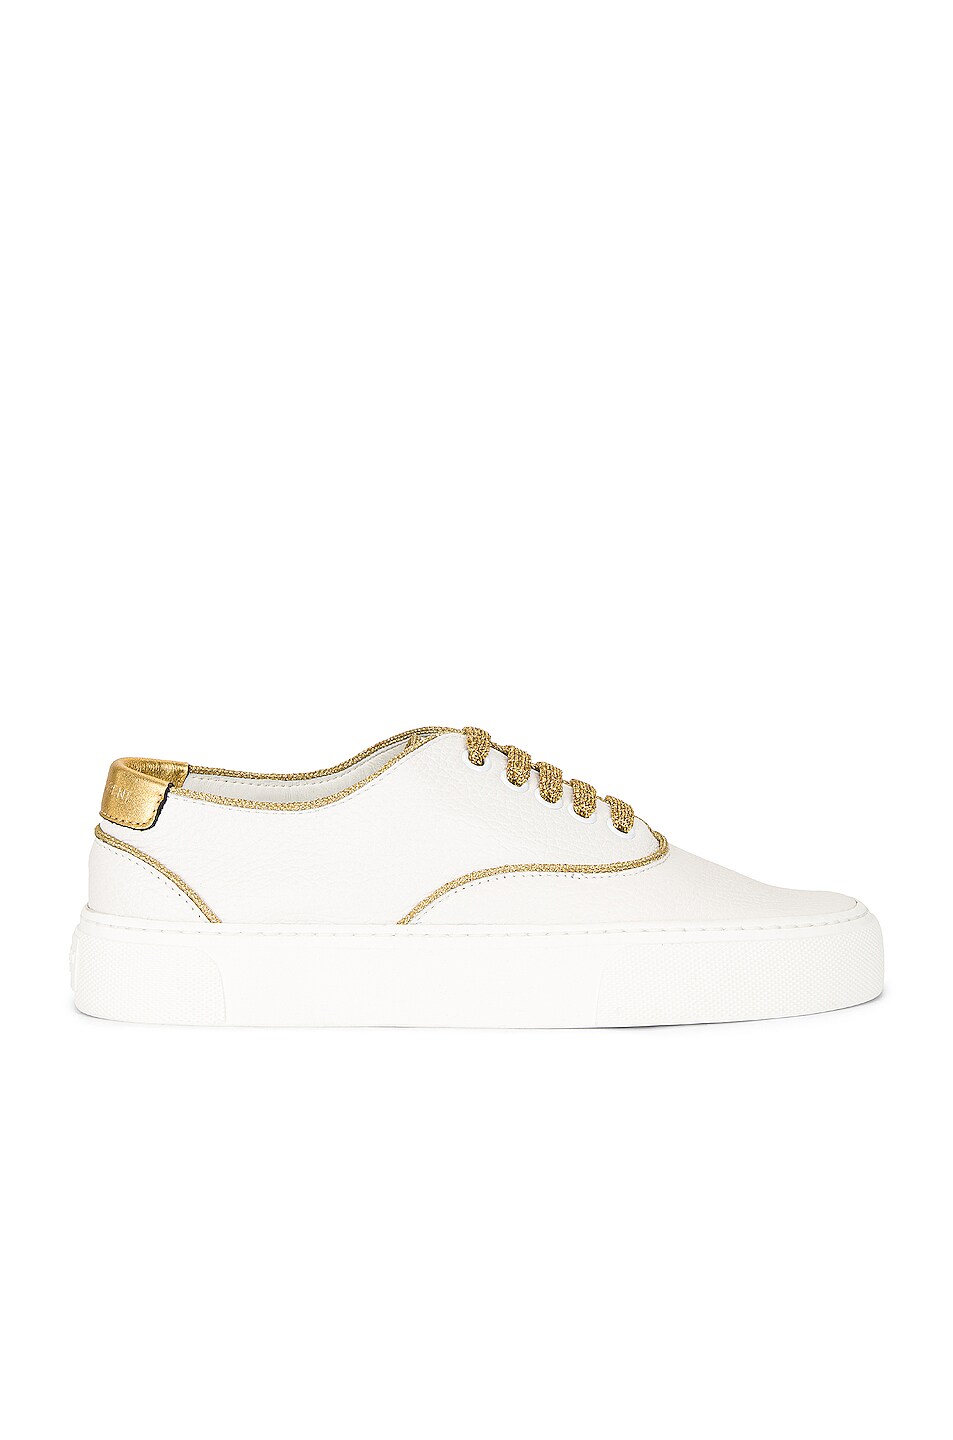 Image 1 of Saint Laurent Lace Up Sneakers in White & Gold